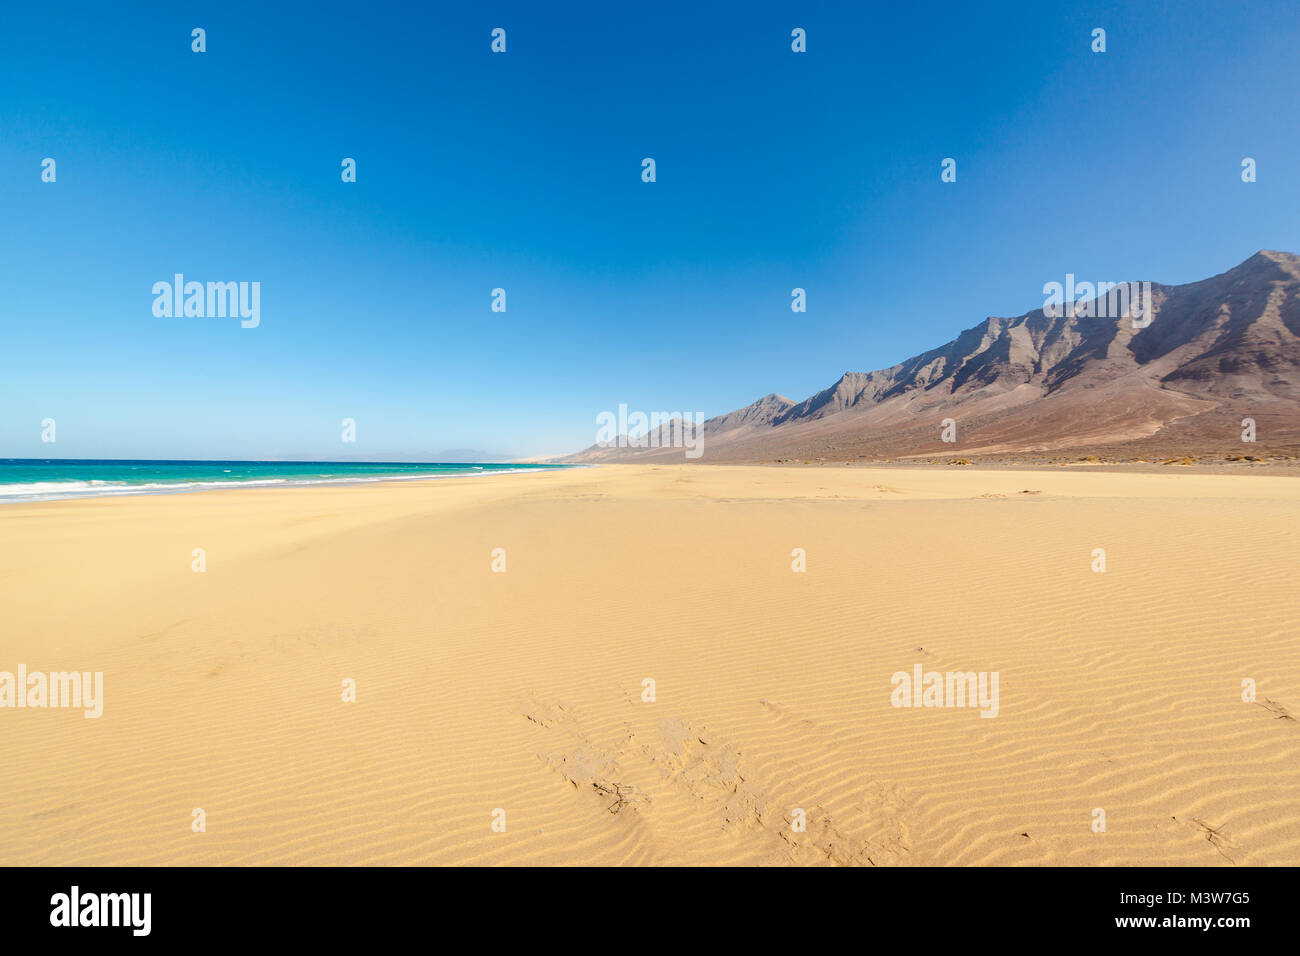 Cofete beach, Fuerteventura, Canary Islands, Spain. Amazing Cofete beach with endless horizon. Volcanic hills in the background and Atlantic Ocean. Stock Photo